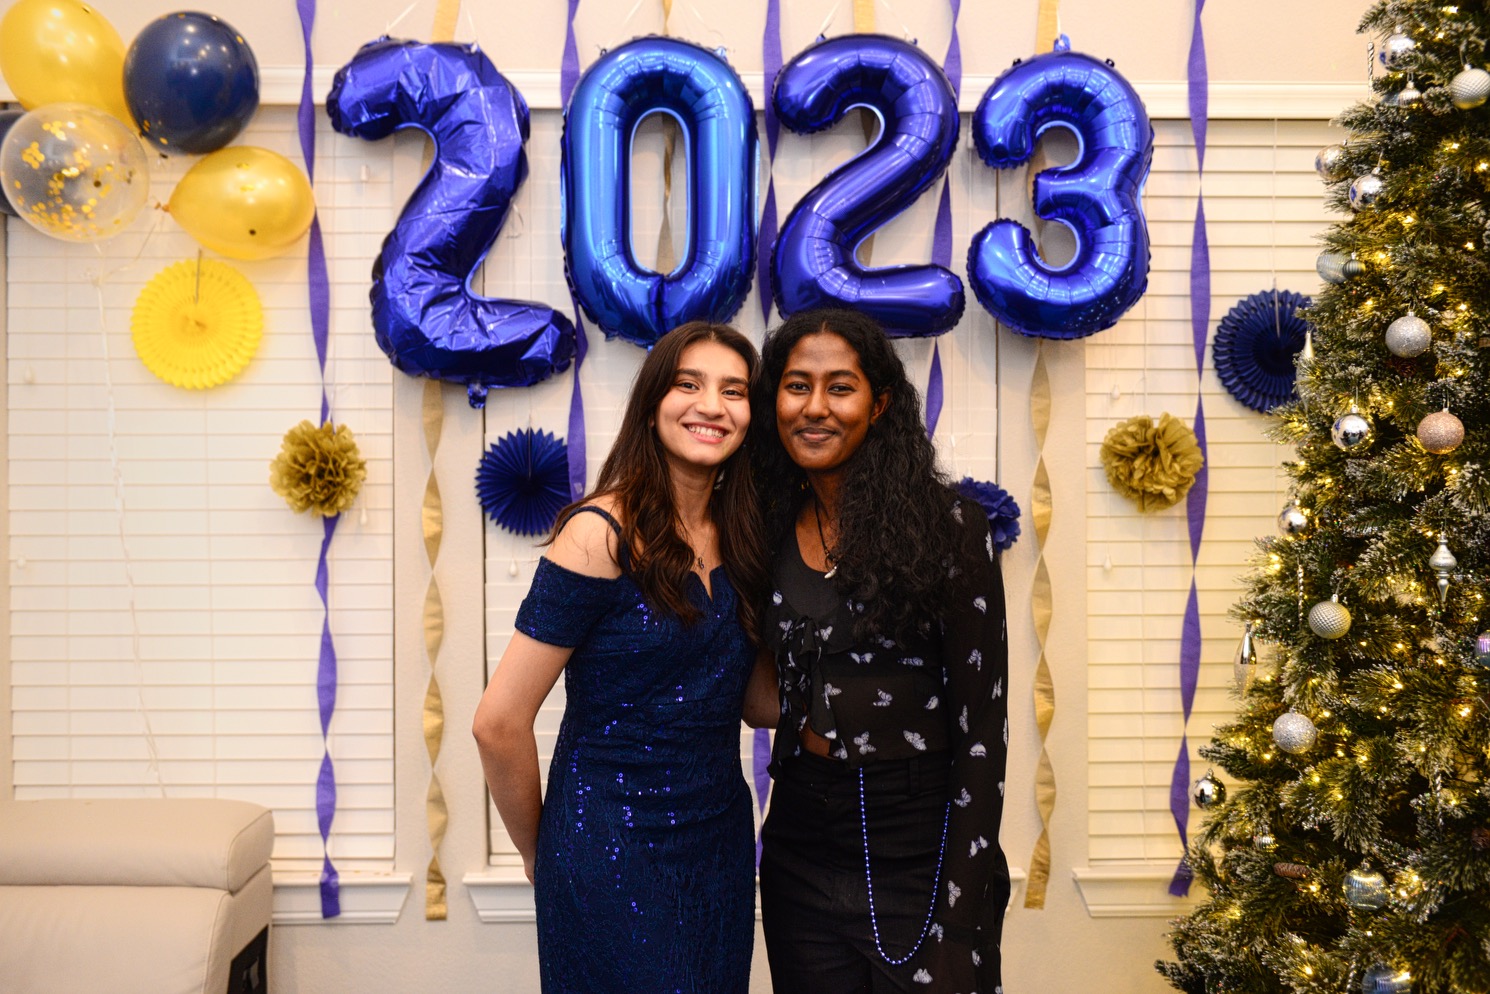 Two females standing next to each other, smiling, with blue balloons that say "2023" and part of a Christmas tree behind them.